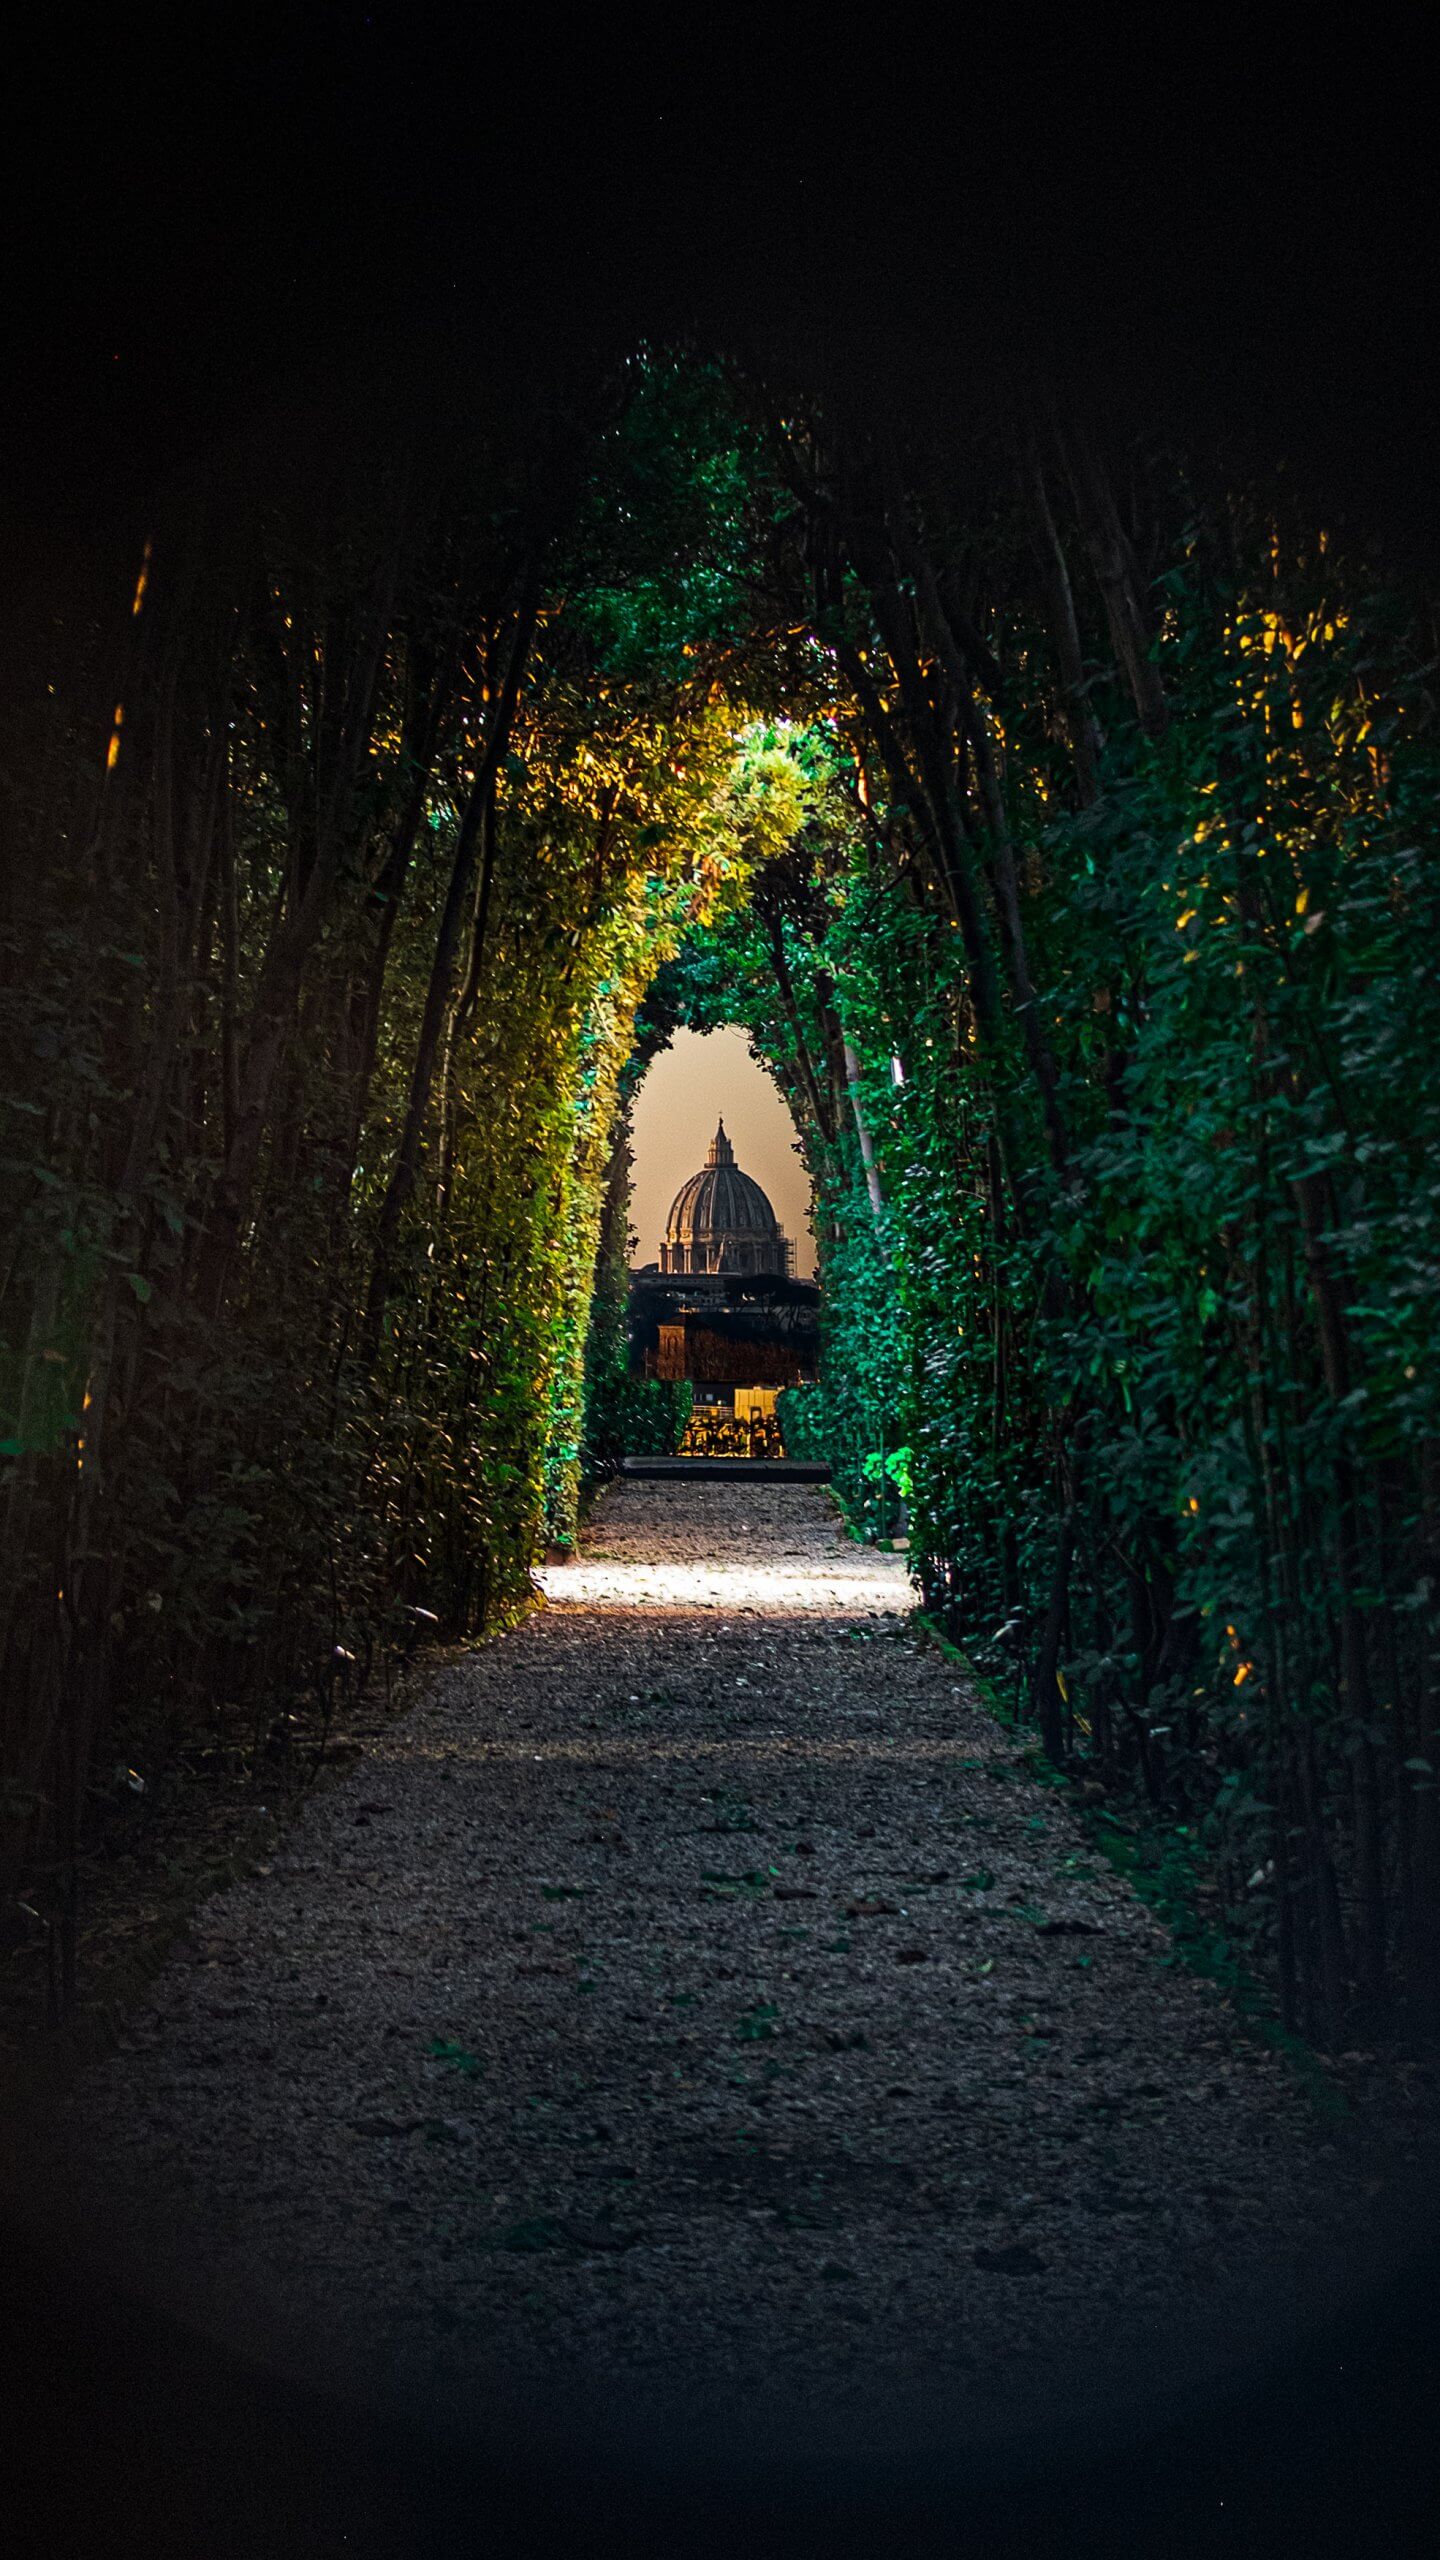 St. Peter's Basilica through the Famous keyhole in Rome, the Aventine Keyhole. Magical!